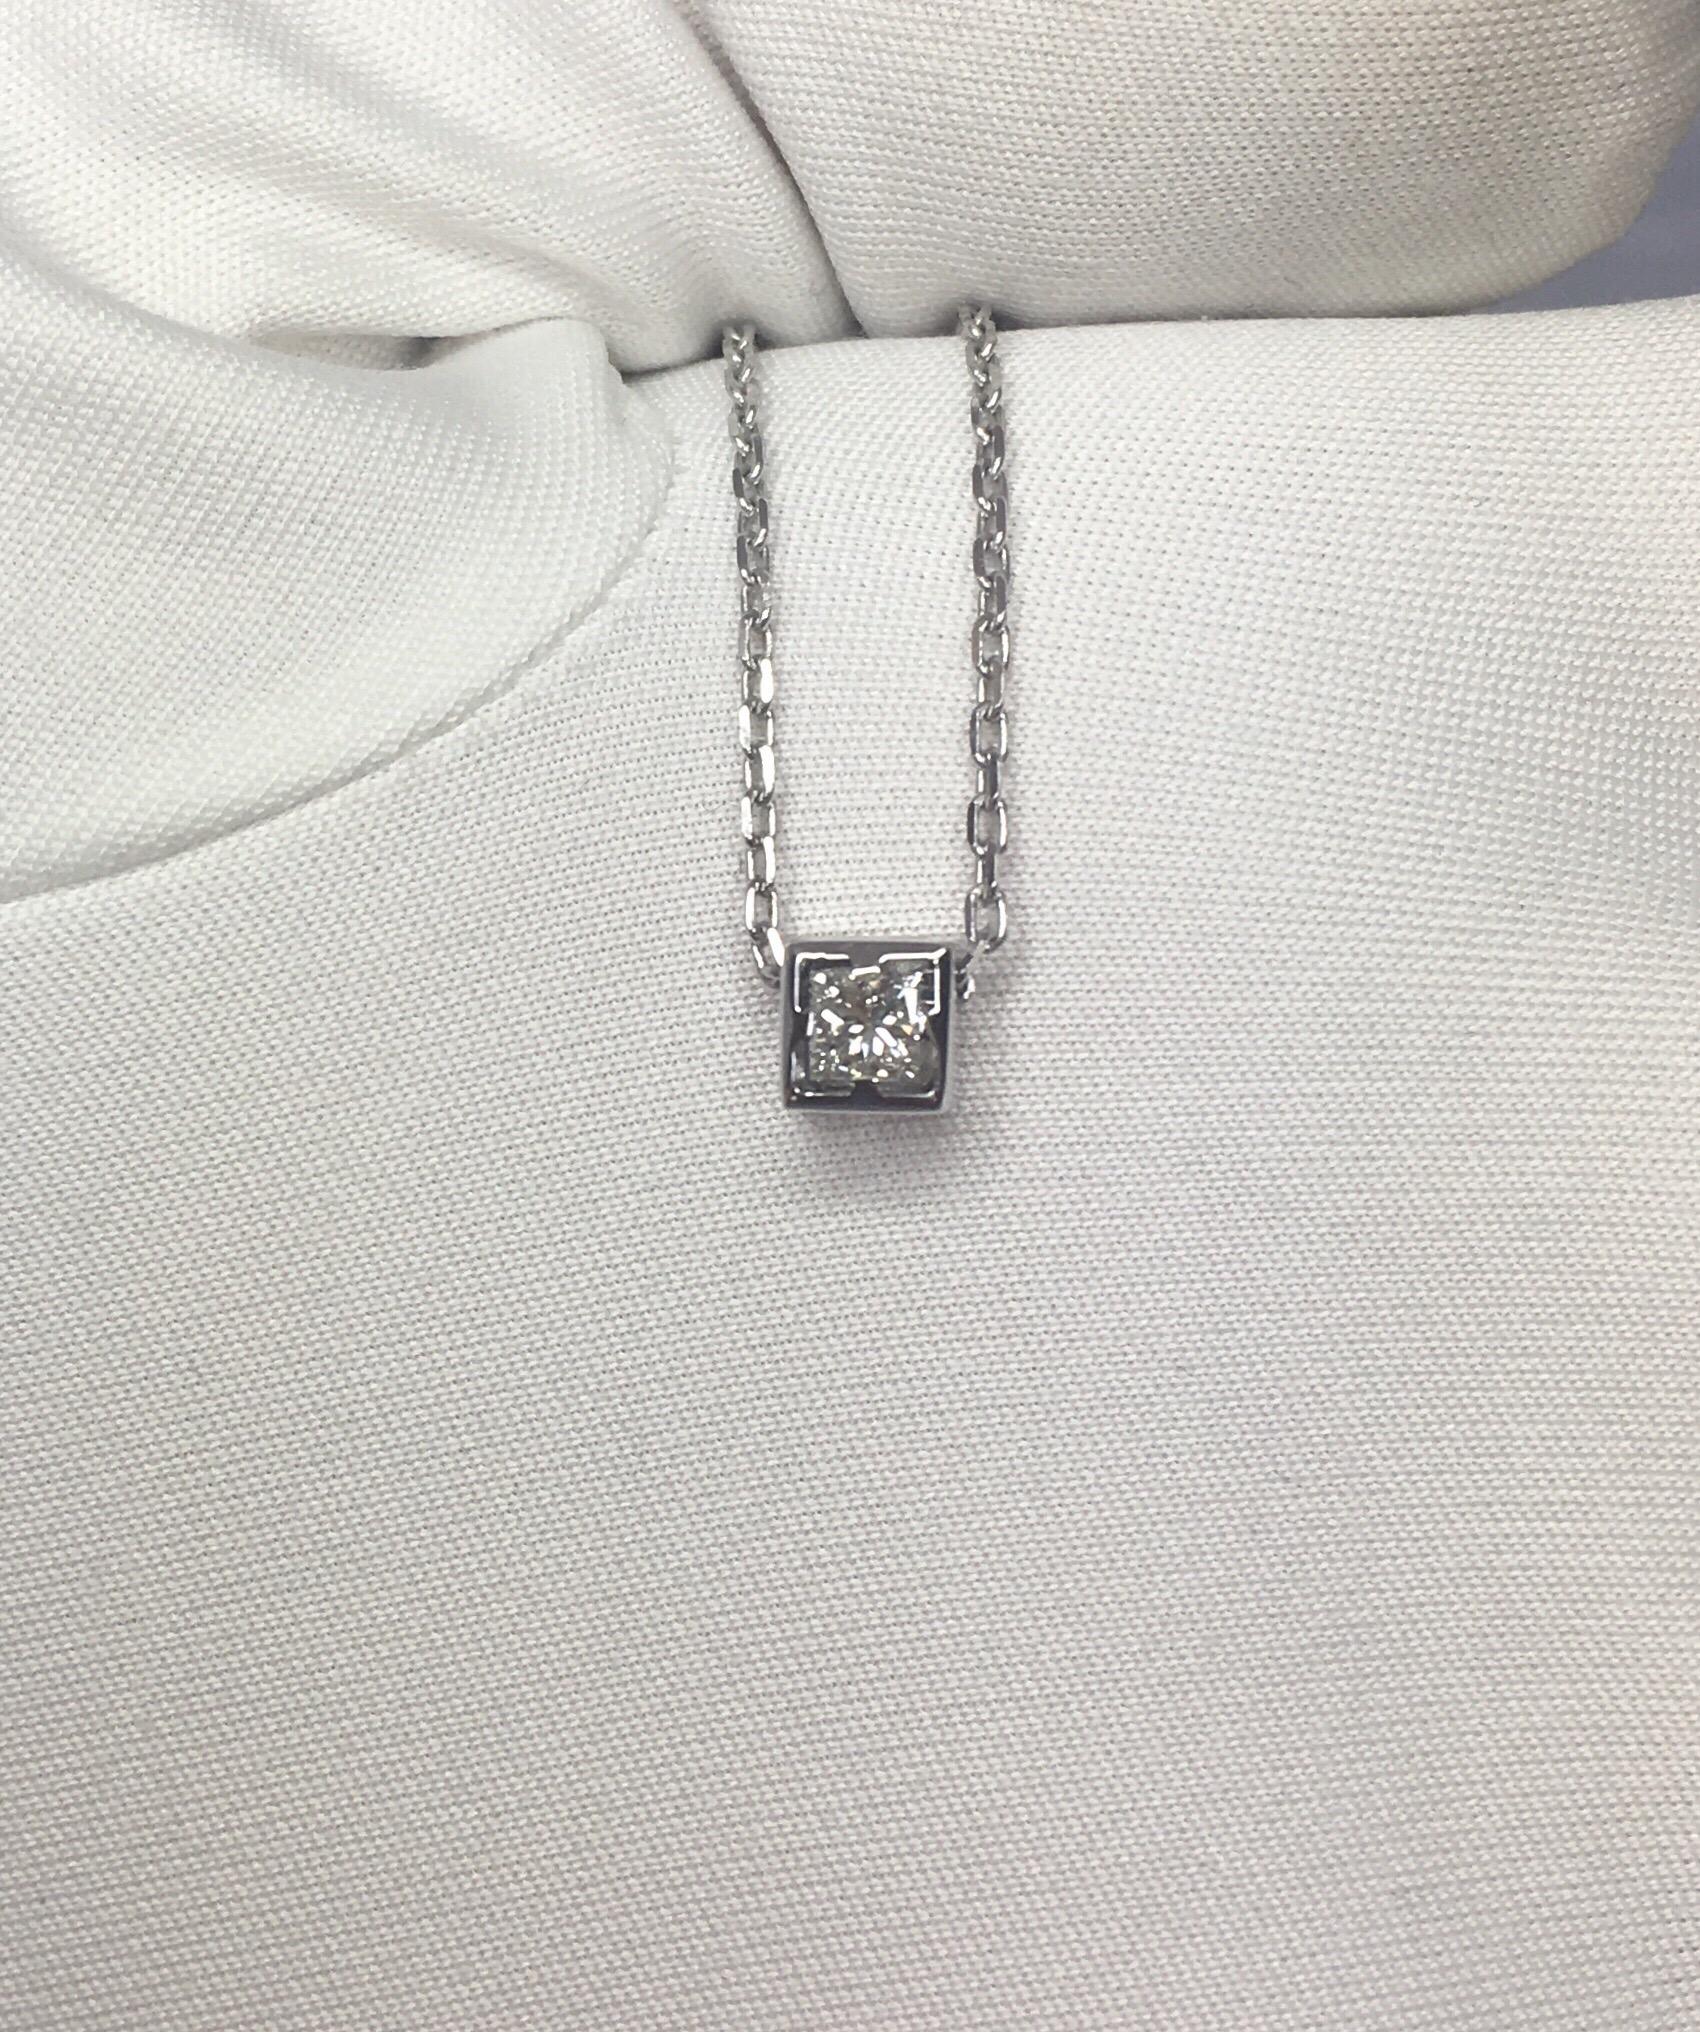 Gucci 18k white gold diamond pendant.

Fine Gucci jewellery piece with a 0.25ct princess/square cut diamond with excellent colour and clarity. Not graded, but a design house like Gucci will only ever use excellent quality diamonds.
This is set in a